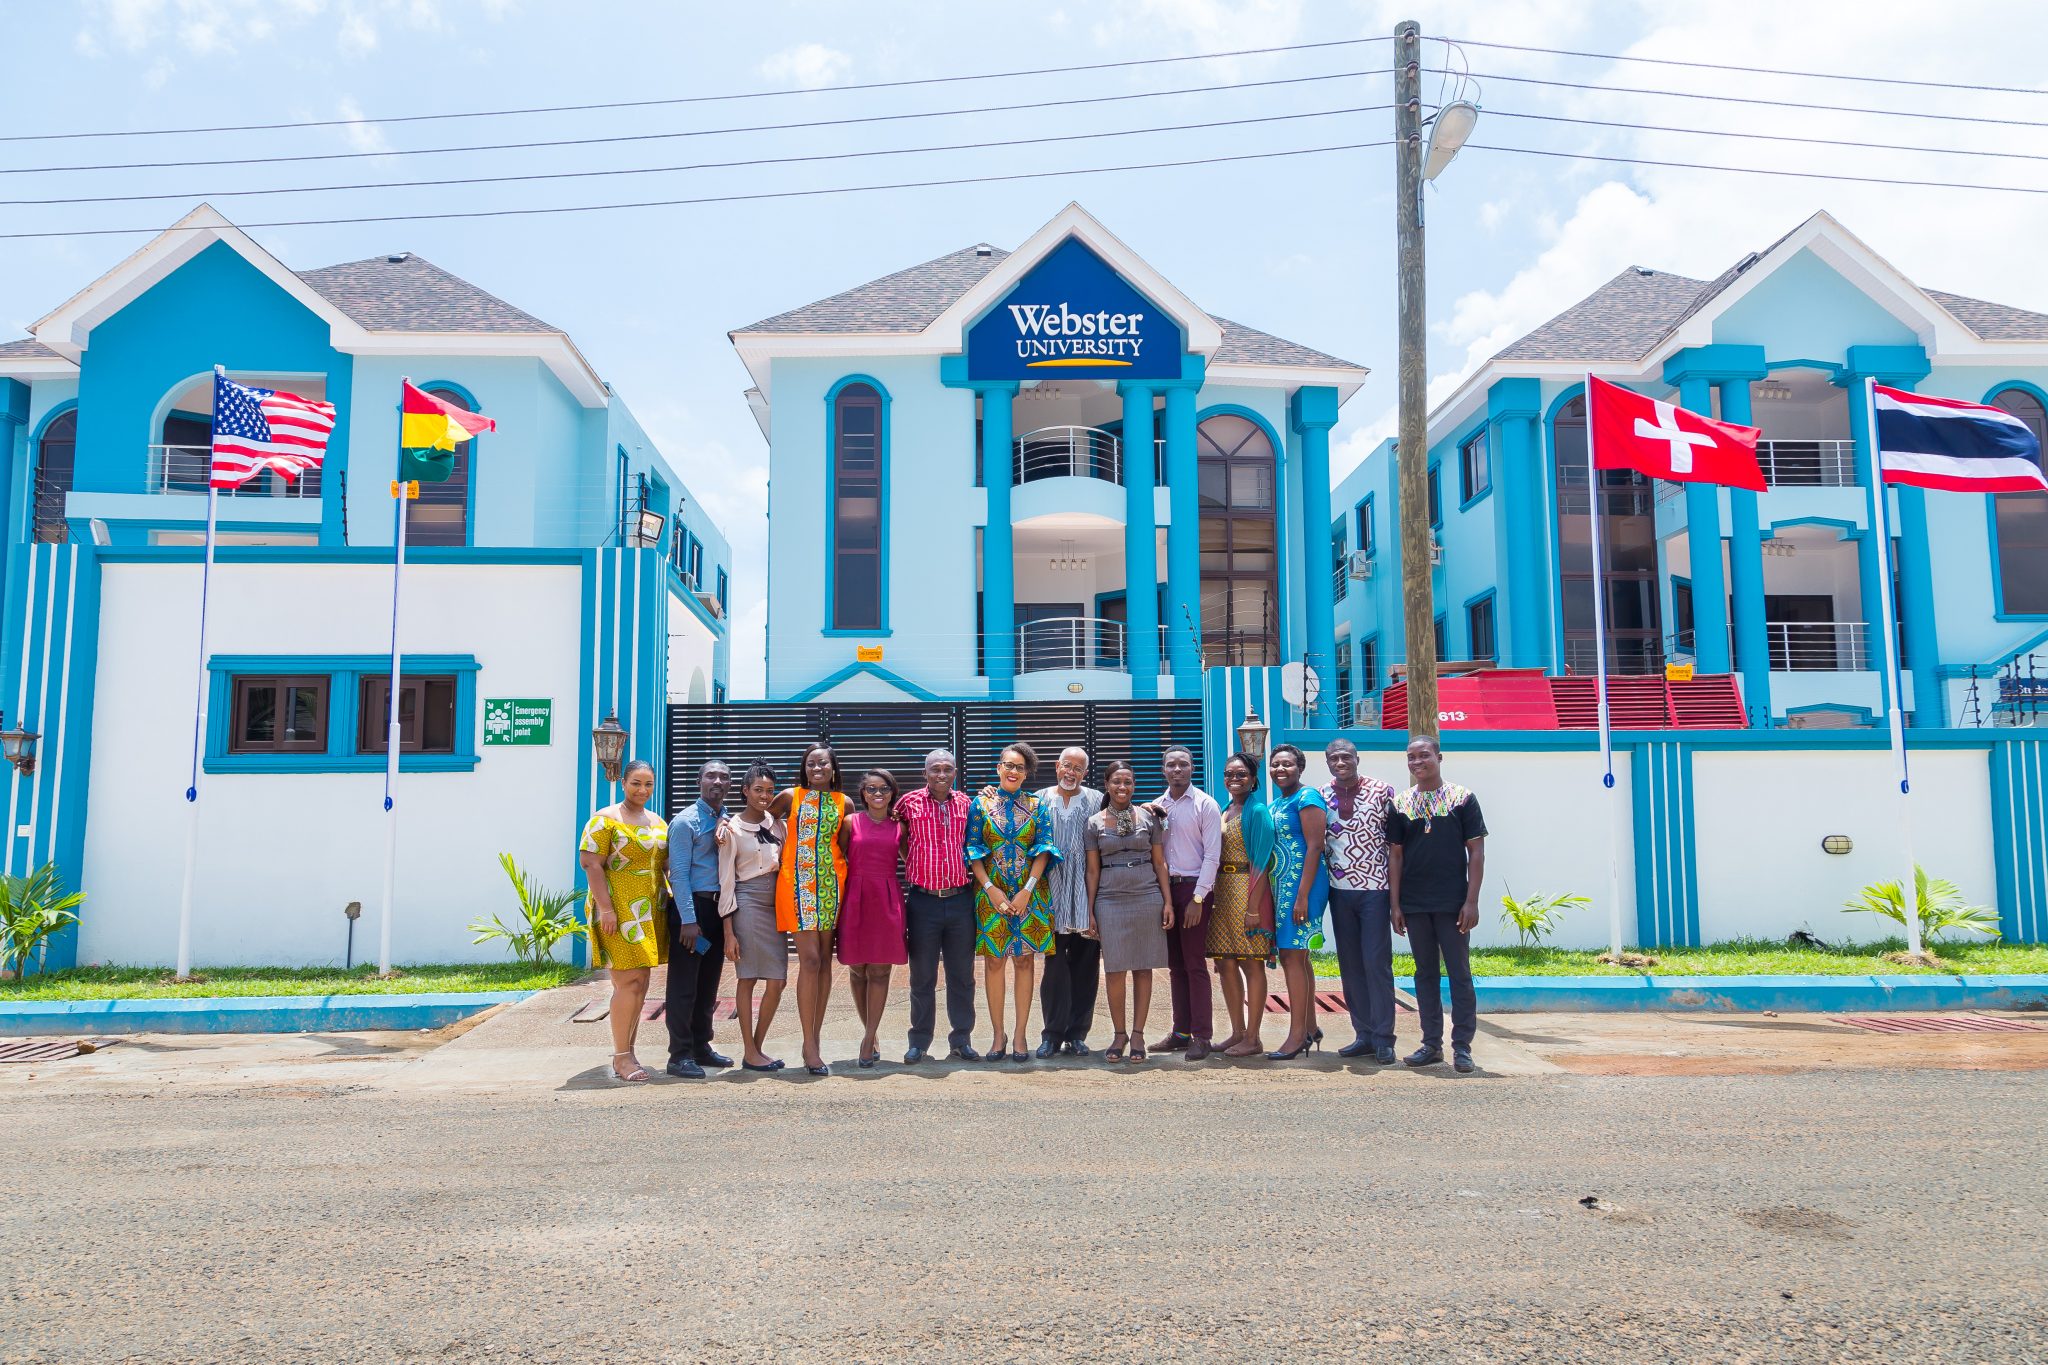 The latest Webster University campus is located in Ghana